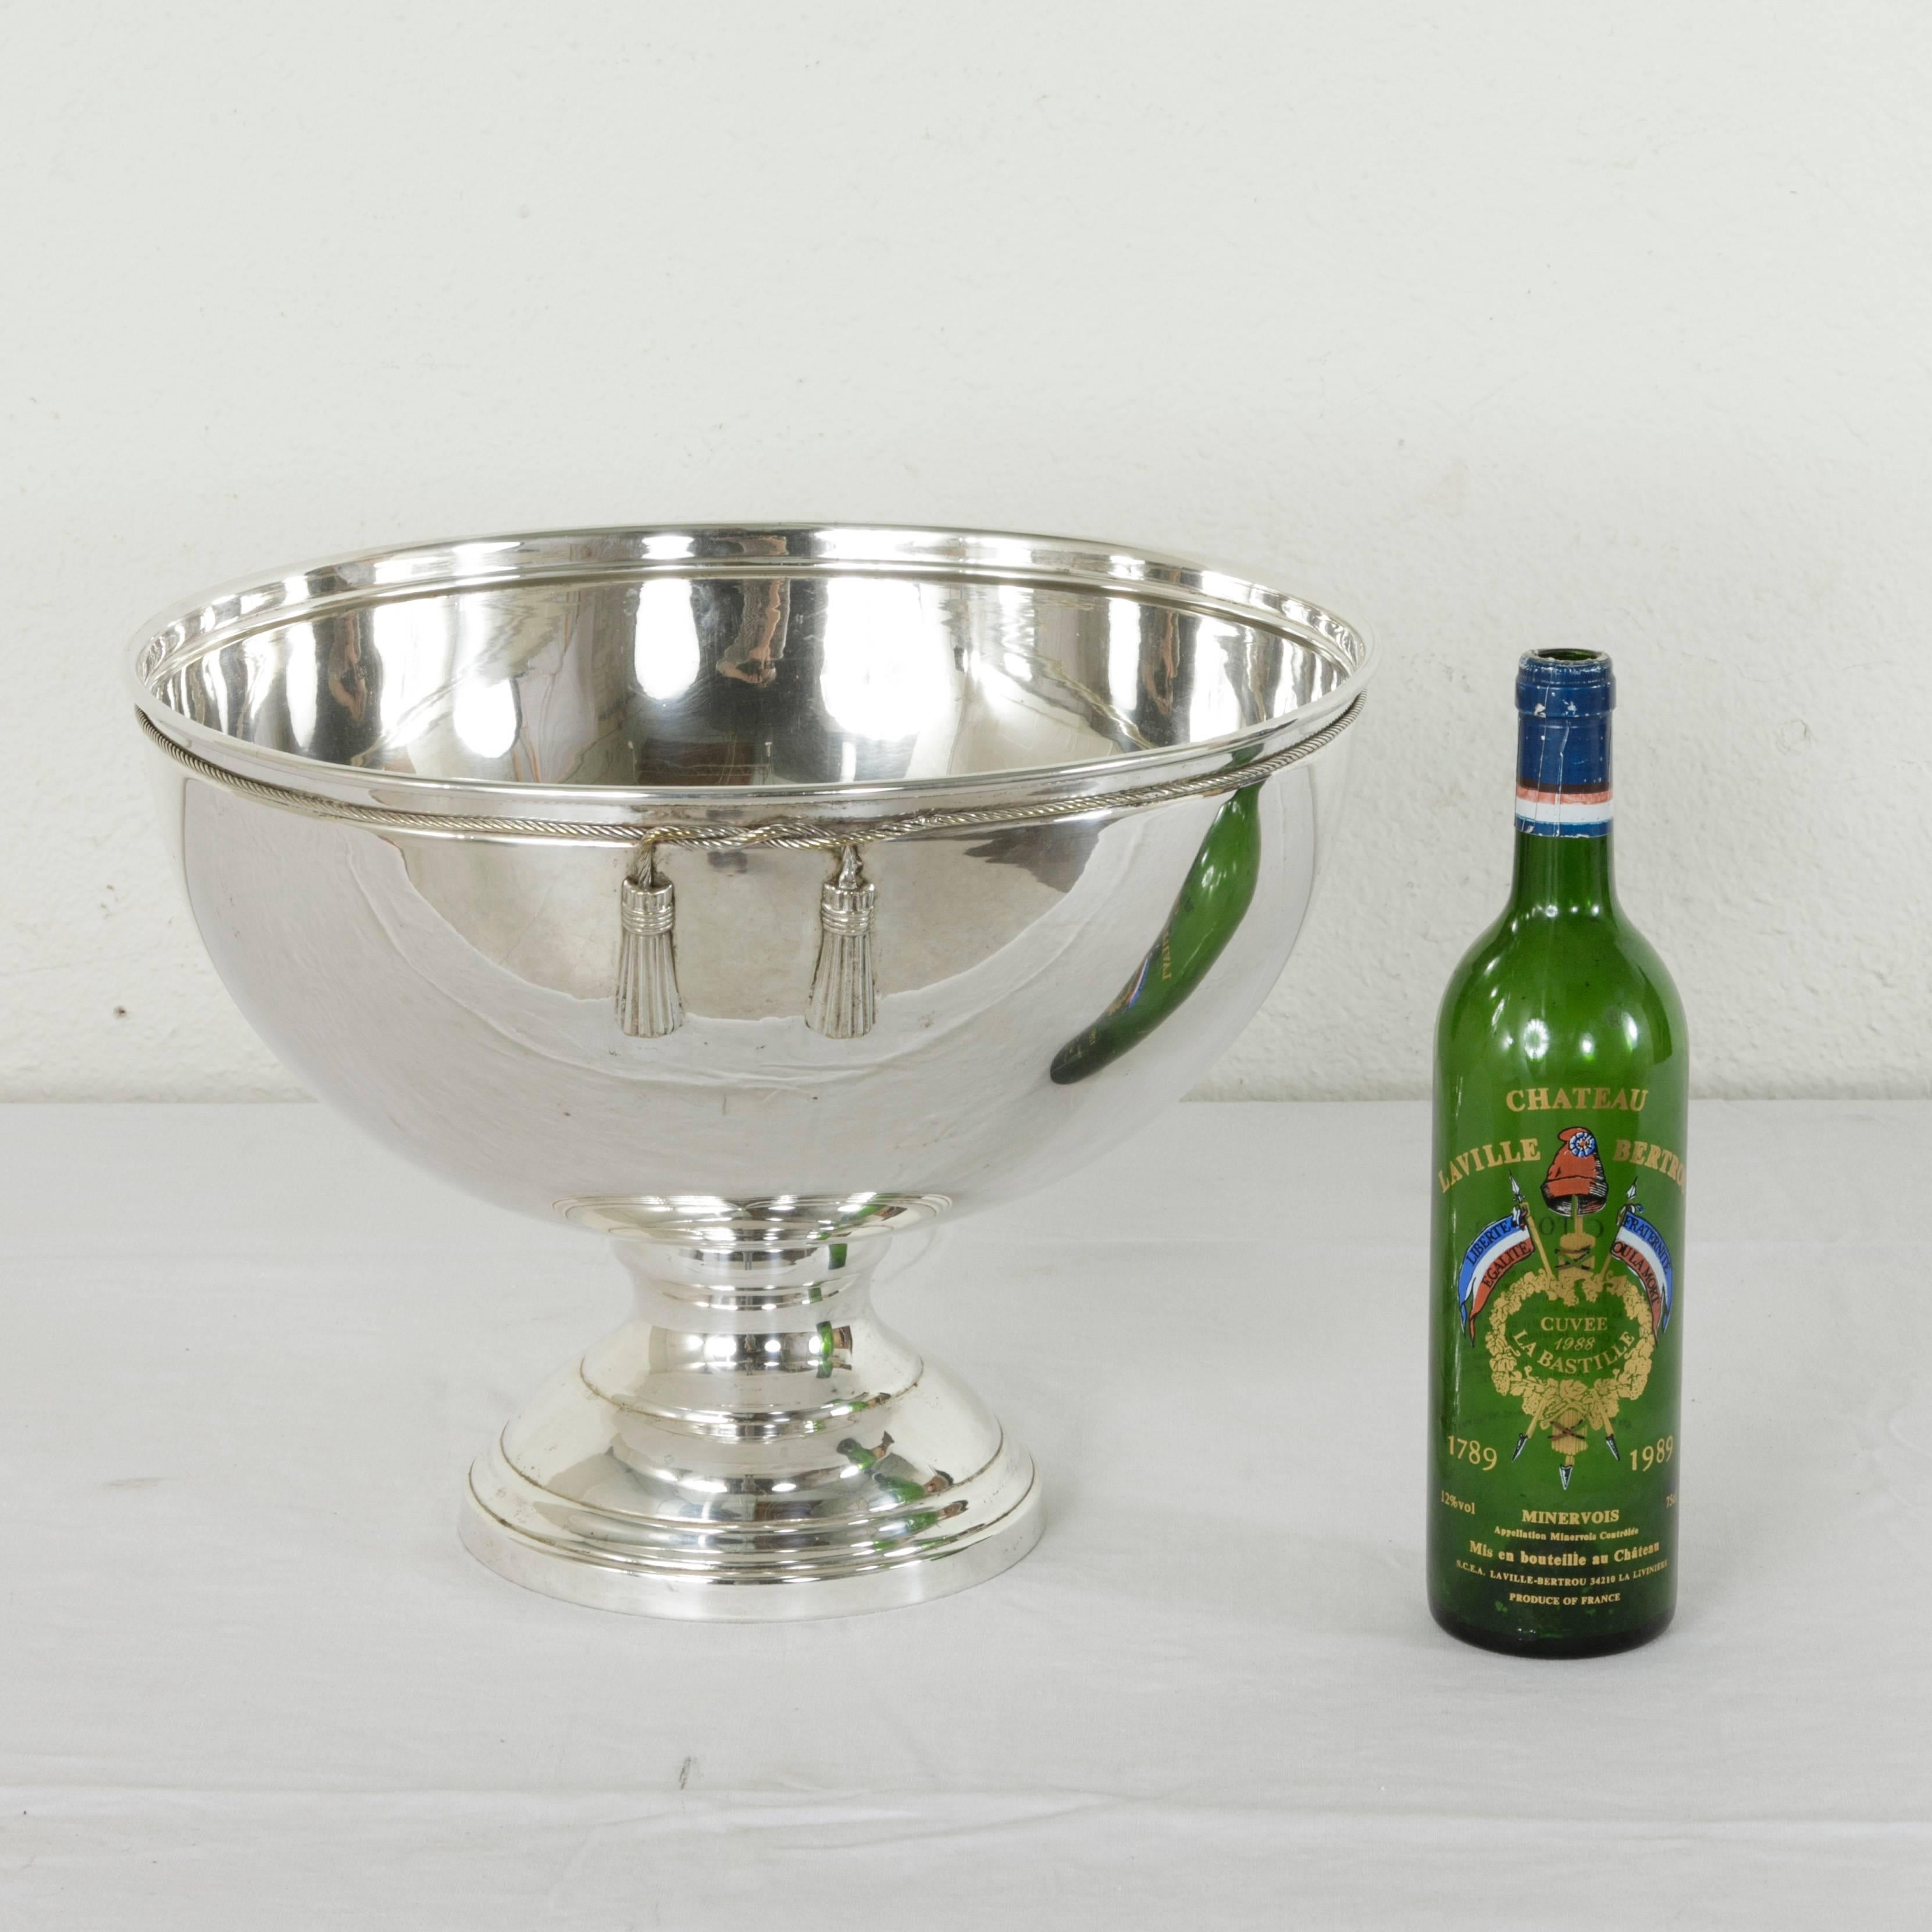 This mid-20th century French silver plate hotel champagne bucket features a twisted rope and tassel motif around its upper rim and can accommodate up to four bottles. The quintessential bar piece, this large champagne bucket is sure to lend elegance